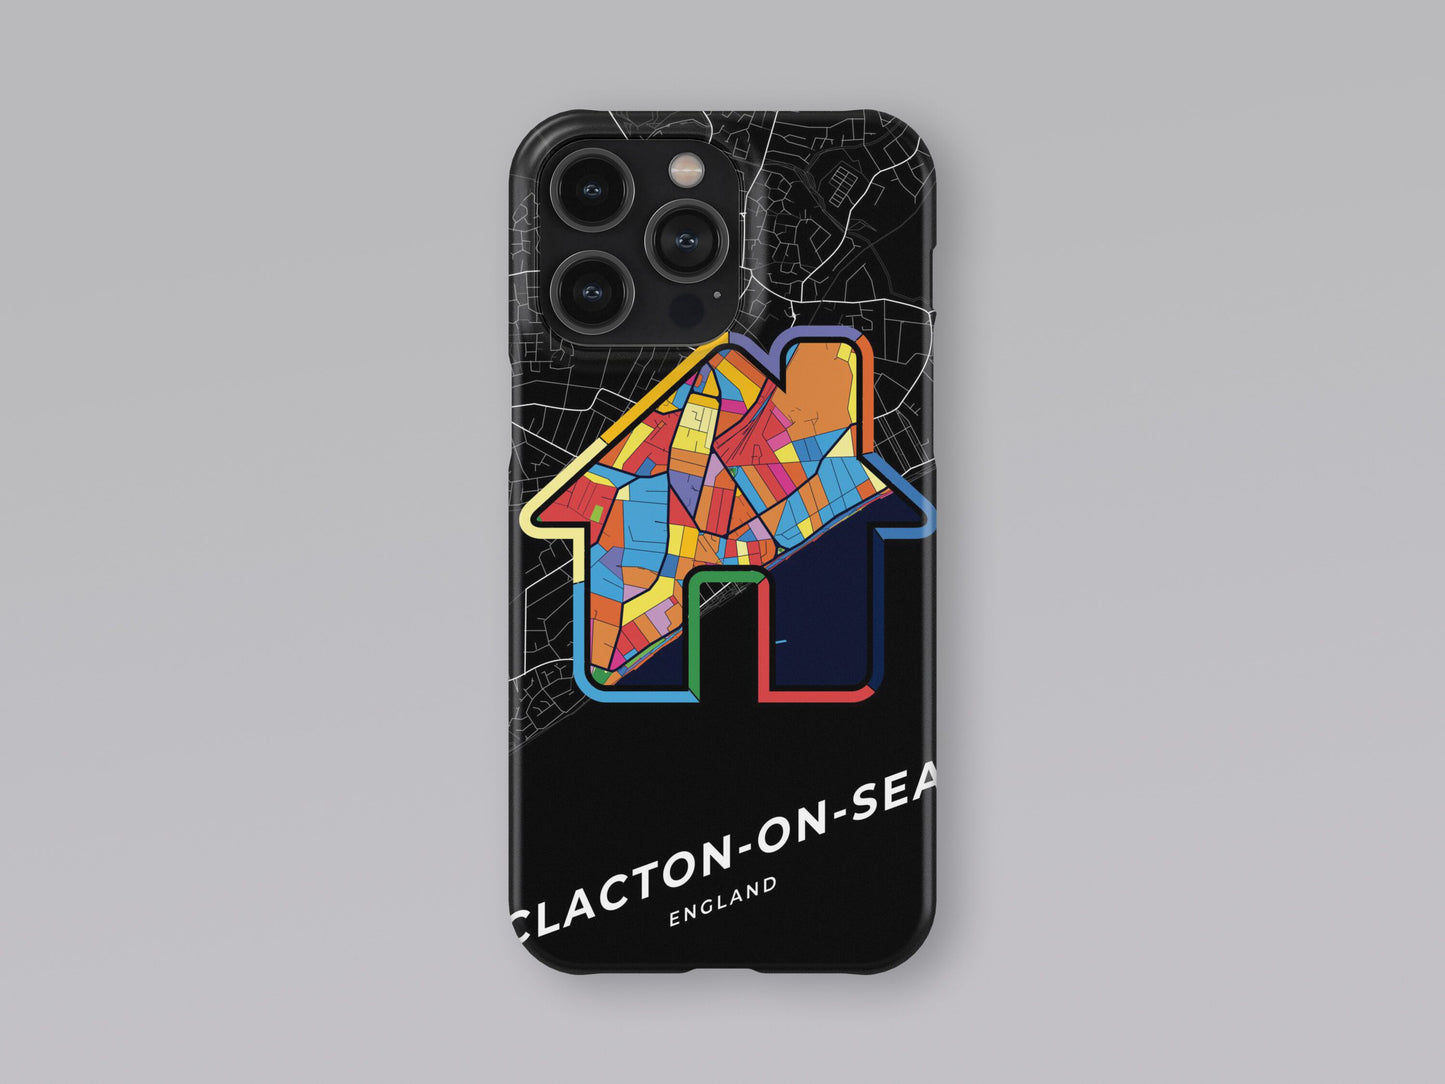 Clacton-On-Sea England slim phone case with colorful icon. Birthday, wedding or housewarming gift. Couple match cases. 3